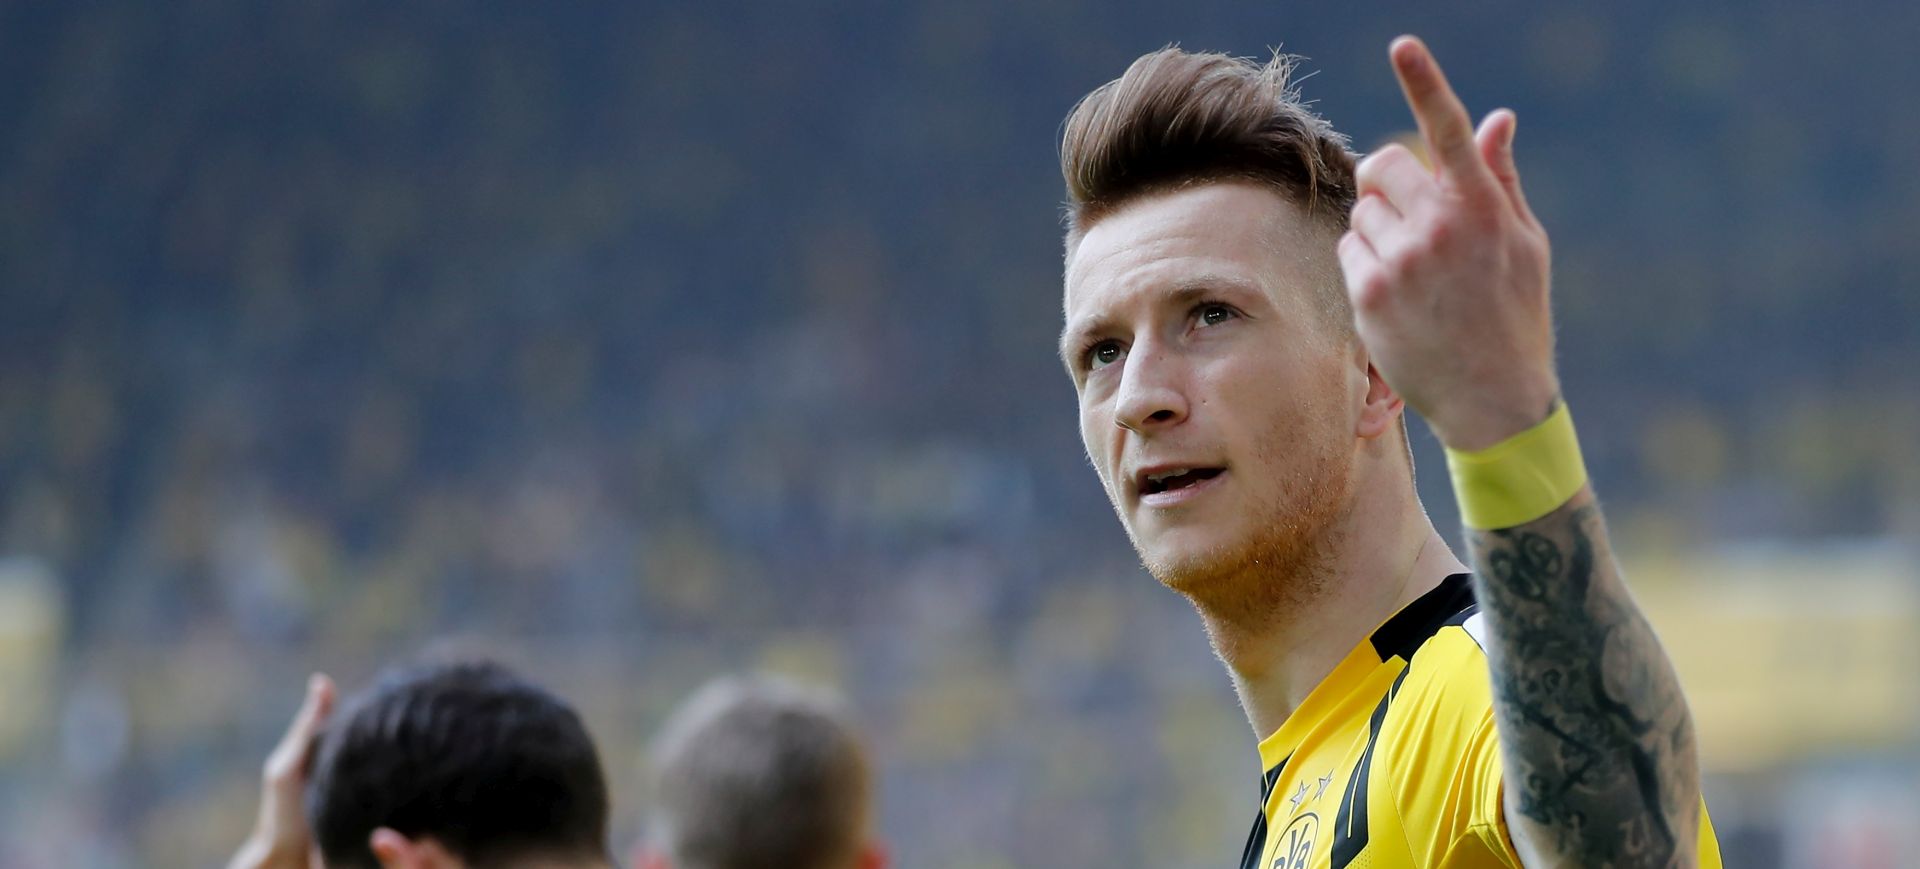 epa05946761 Dortmund's Marco Reus celebrates scoring the first goal during the German Bundesliga soccer match between Borussia Dortmund and TSG 1899 Hoffenheim in Dortmund, Germany, 06 May 2017.  EPA/FRIEDEMANN VOGEL EMBARGO CONDITIONS - ATTENTION: Due to the accreditation guidelines, the DFL only permits the publication and utilisation of up to 15 pictures per match on the internet and in online media during the match.